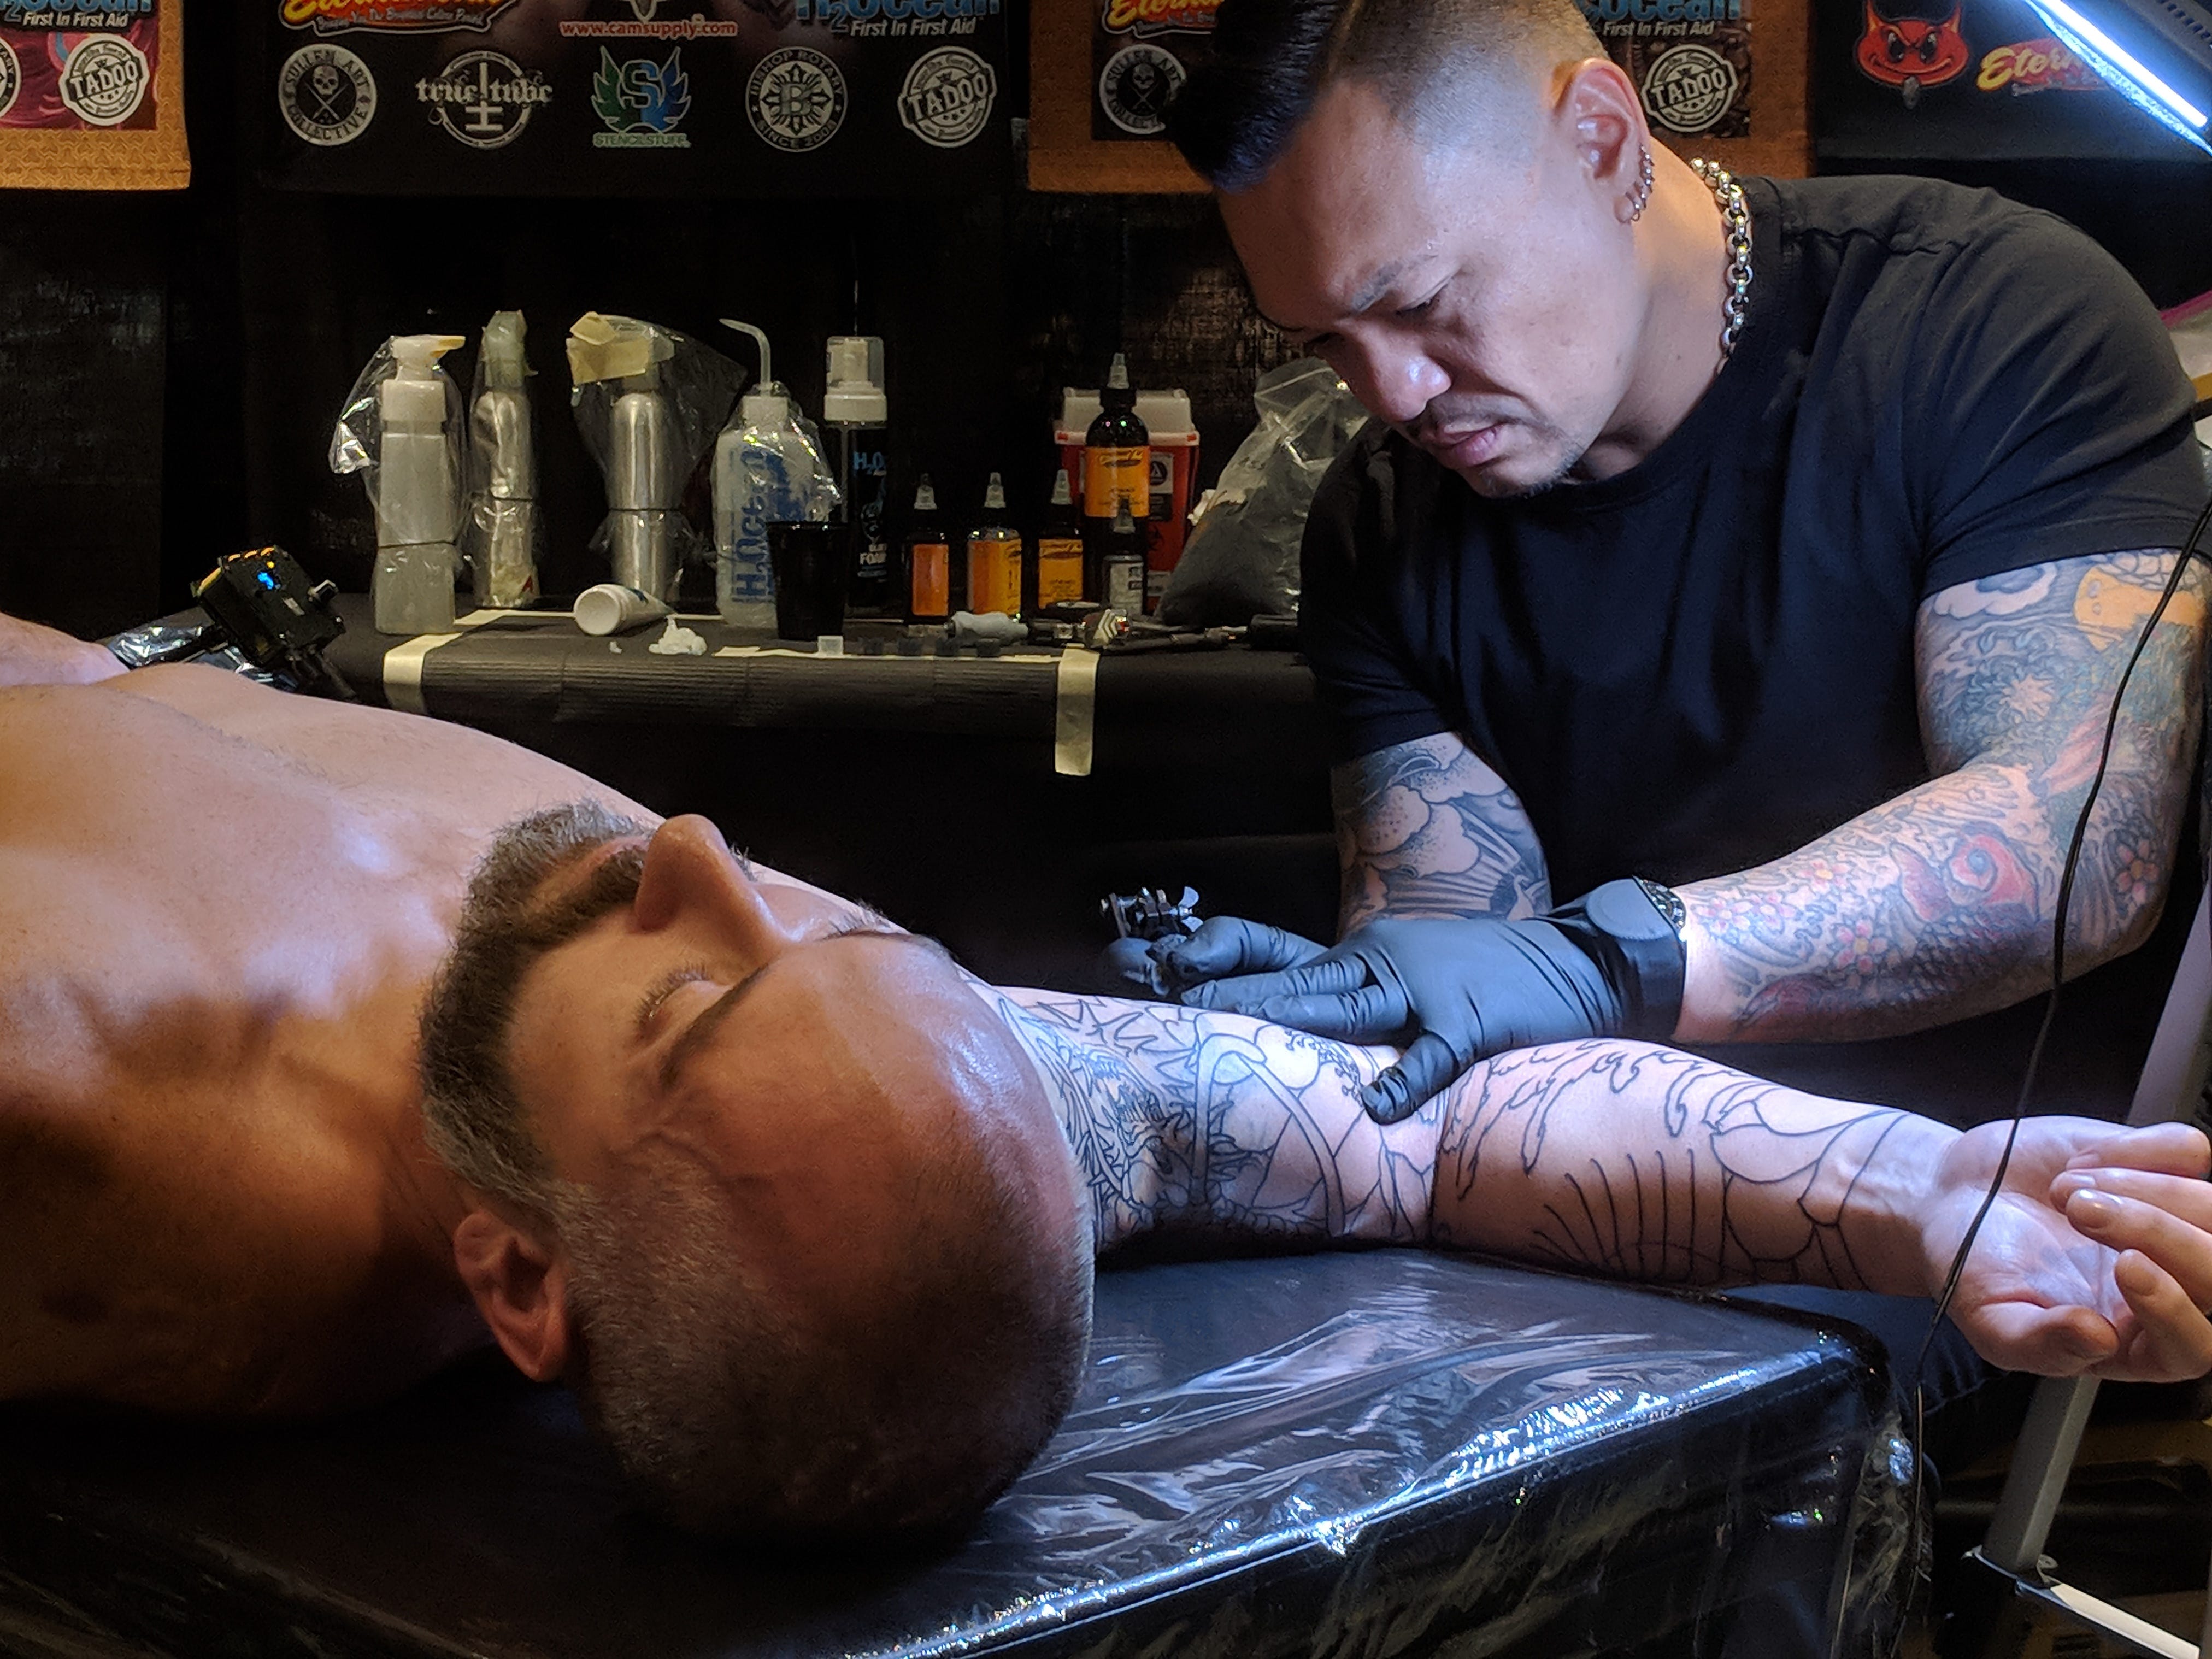 New Mission District tattoo studio offers madetofade tattoos that